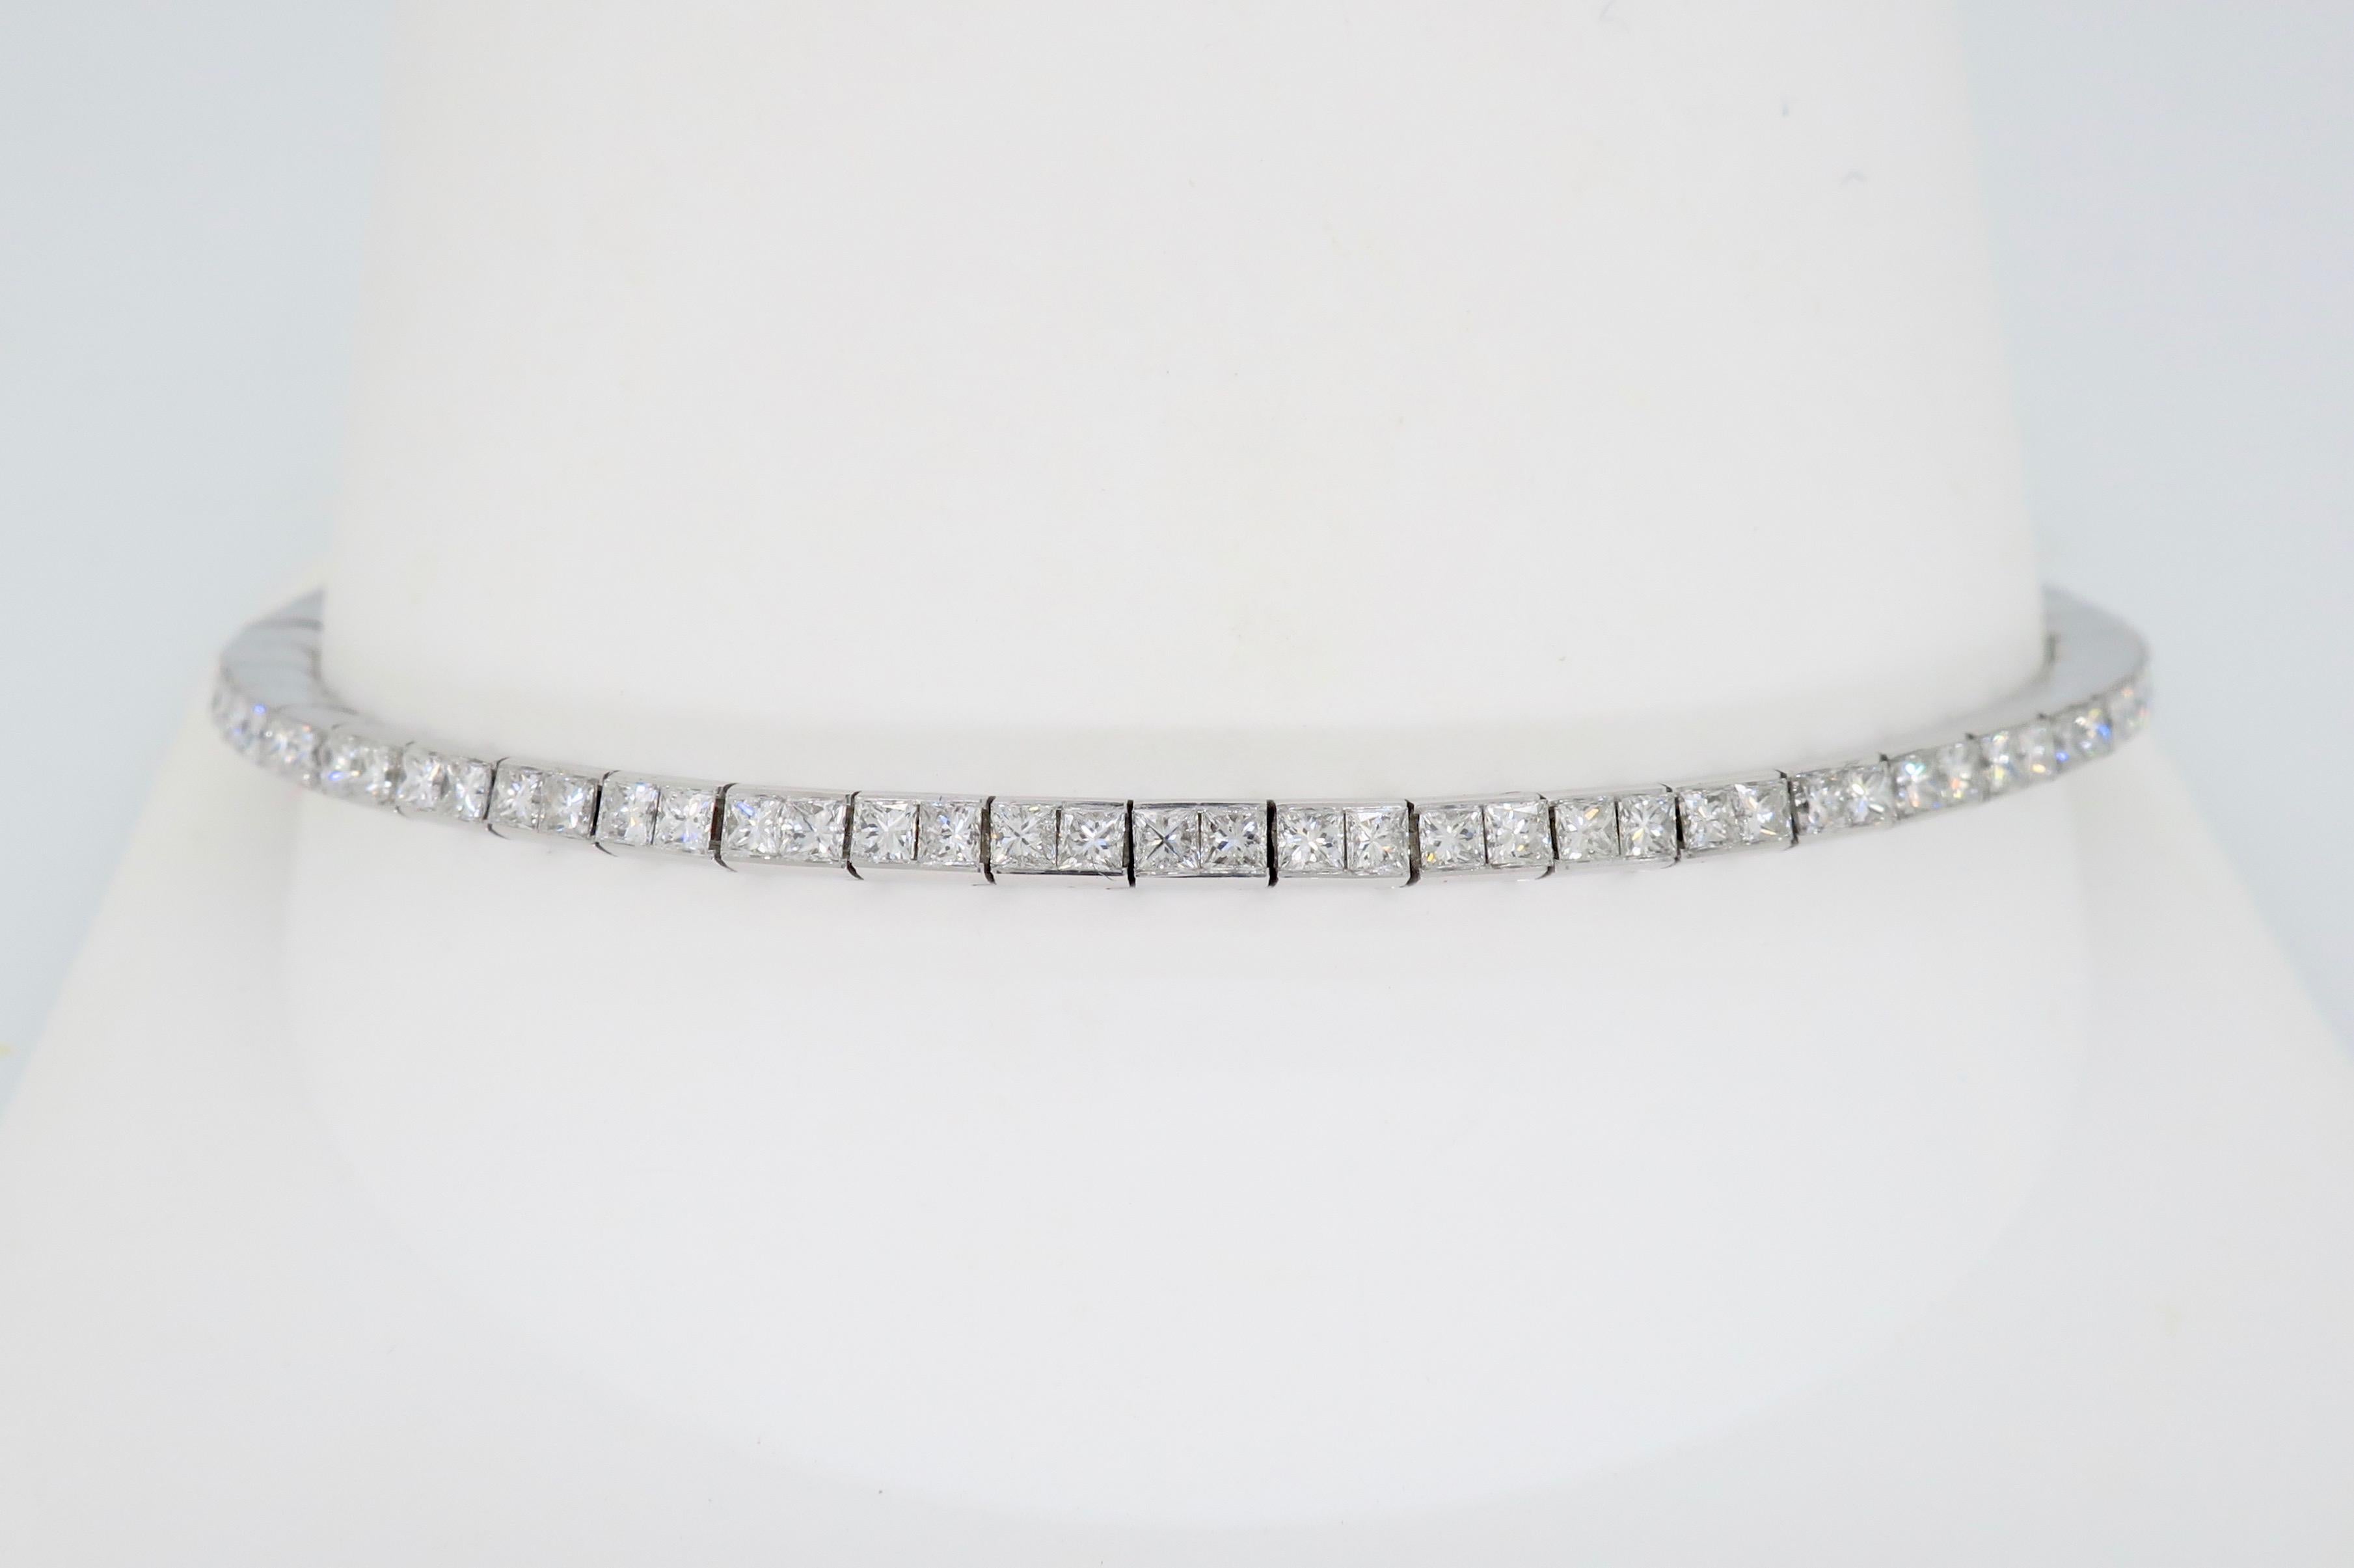 Classic Princess Cut diamond line bracelet crafted in 18k white gold.

Diamond Carat Weight: Approximately 3.73CTW
Diamond Cut: Princess Cut 
Color: Average G-I
Clarity: Average VS2-SI2
Metal: 18K White Gold
Marked/Tested: Stamped  “3.73